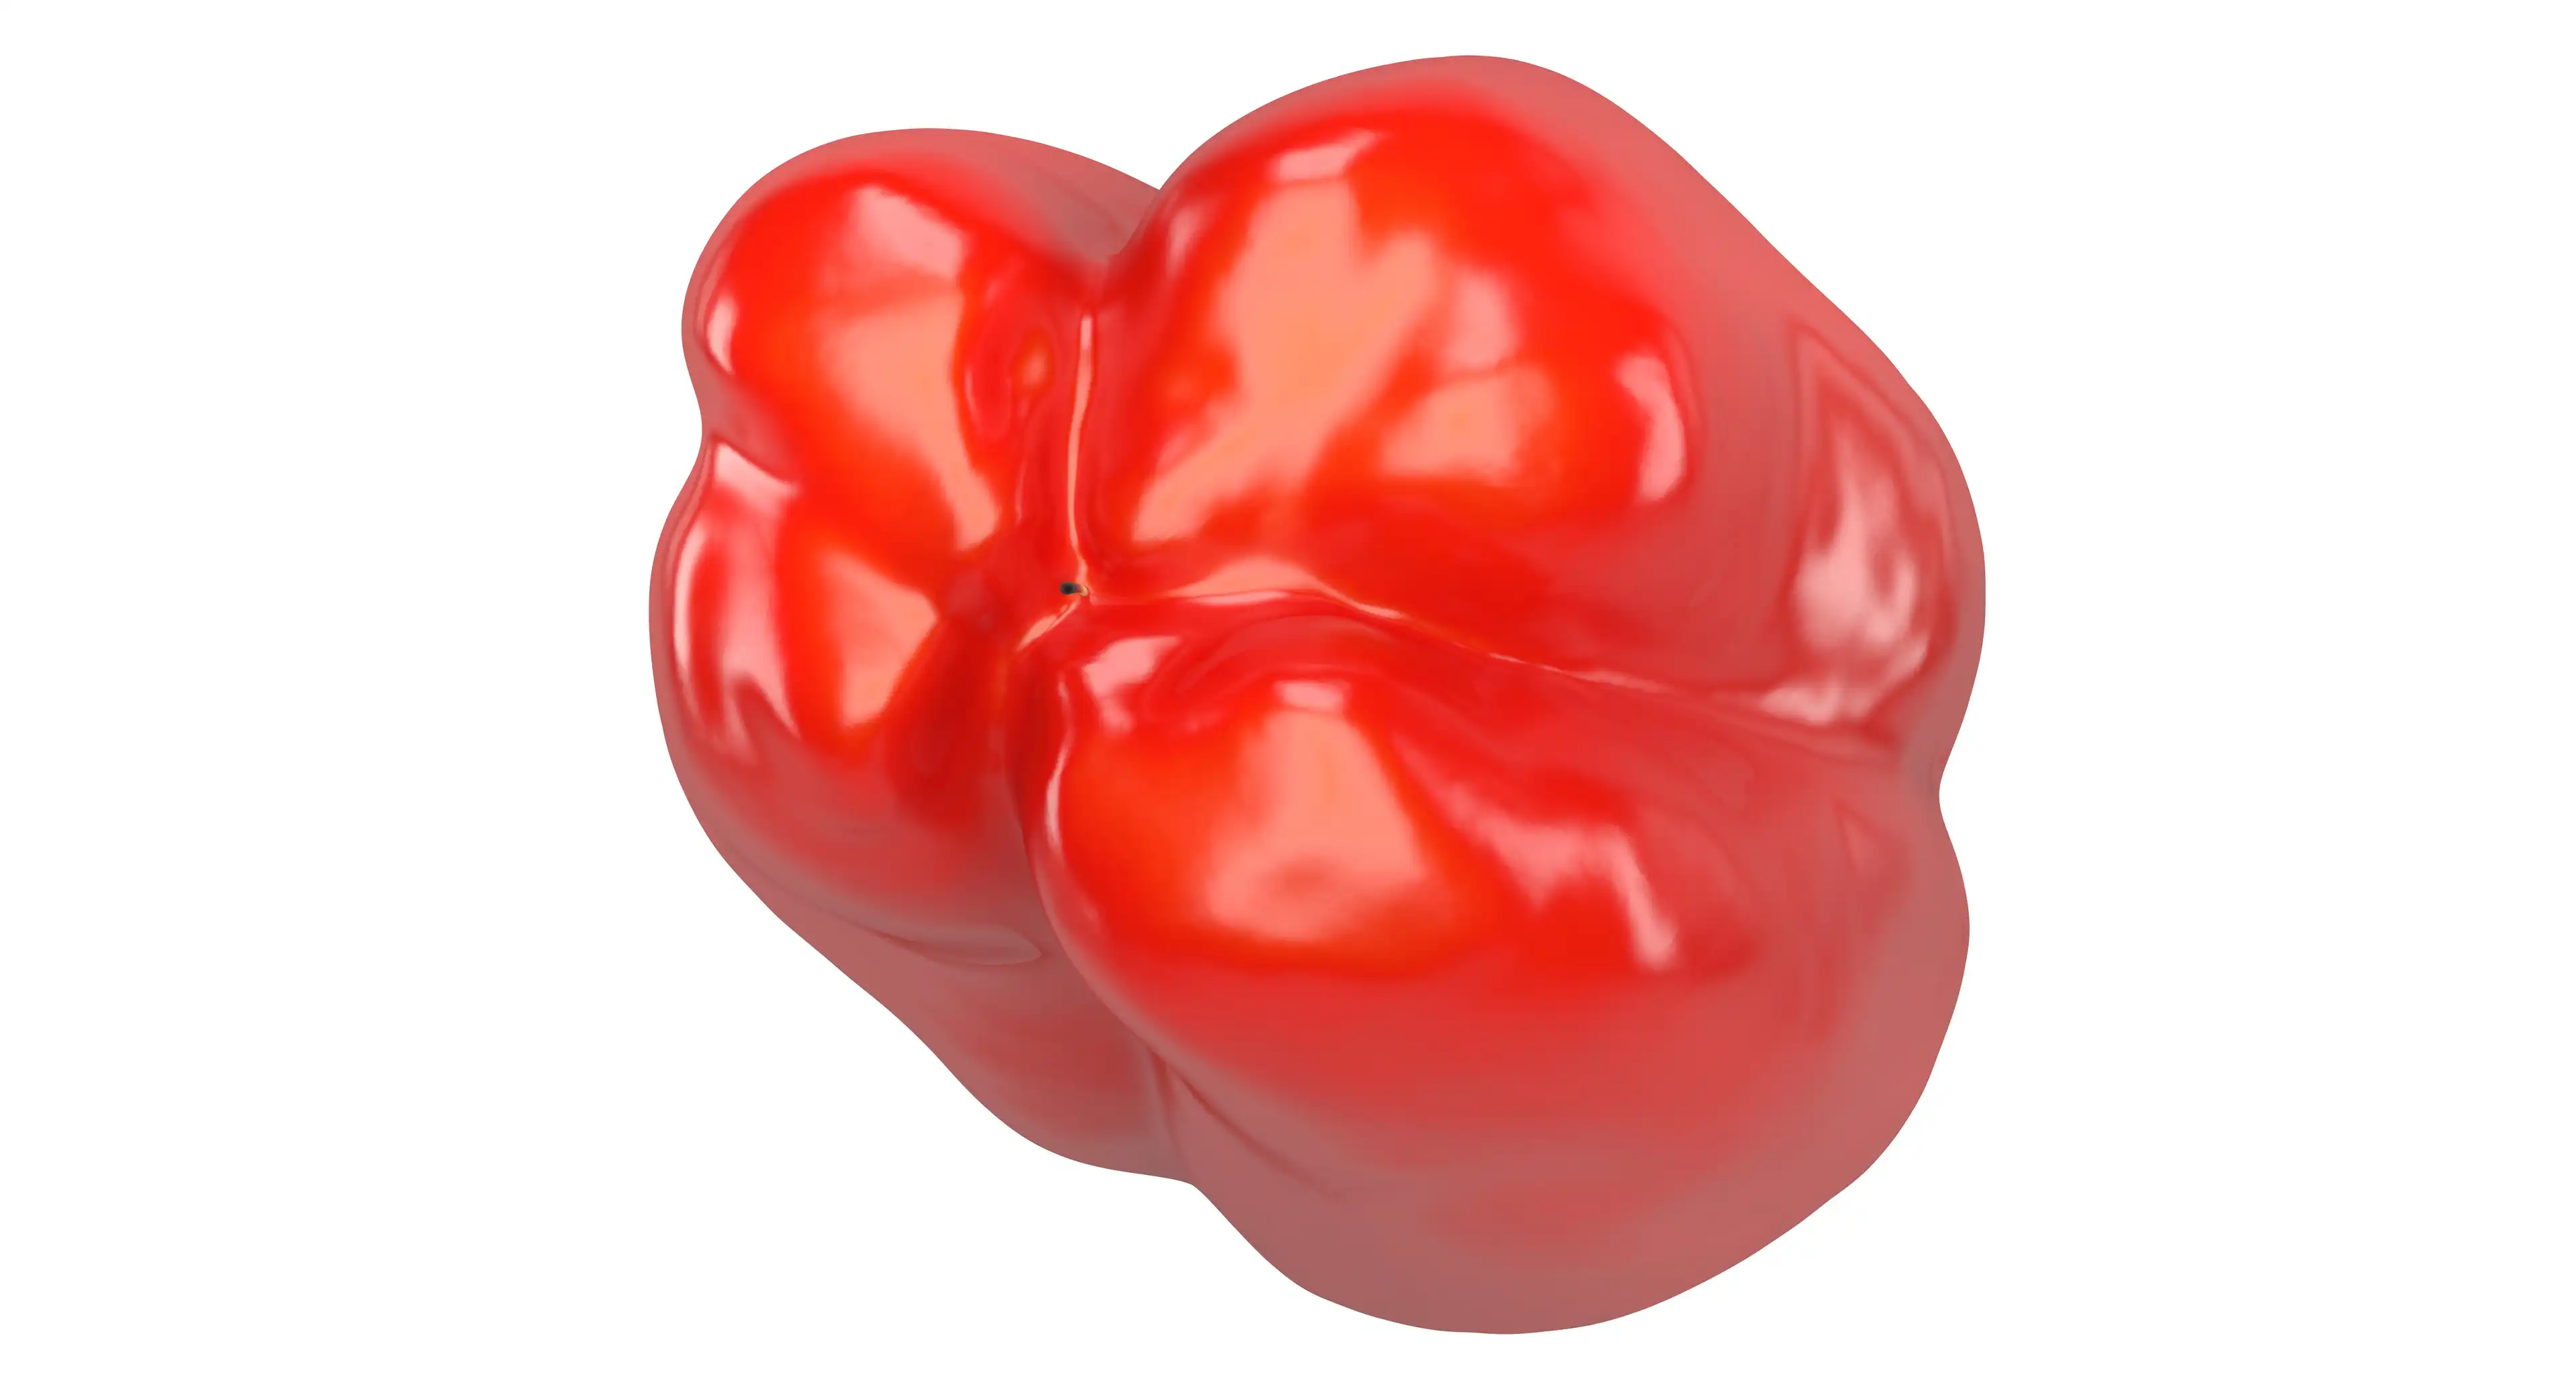 The bottom view of red bell pepper 3d model with close up on its pistil.